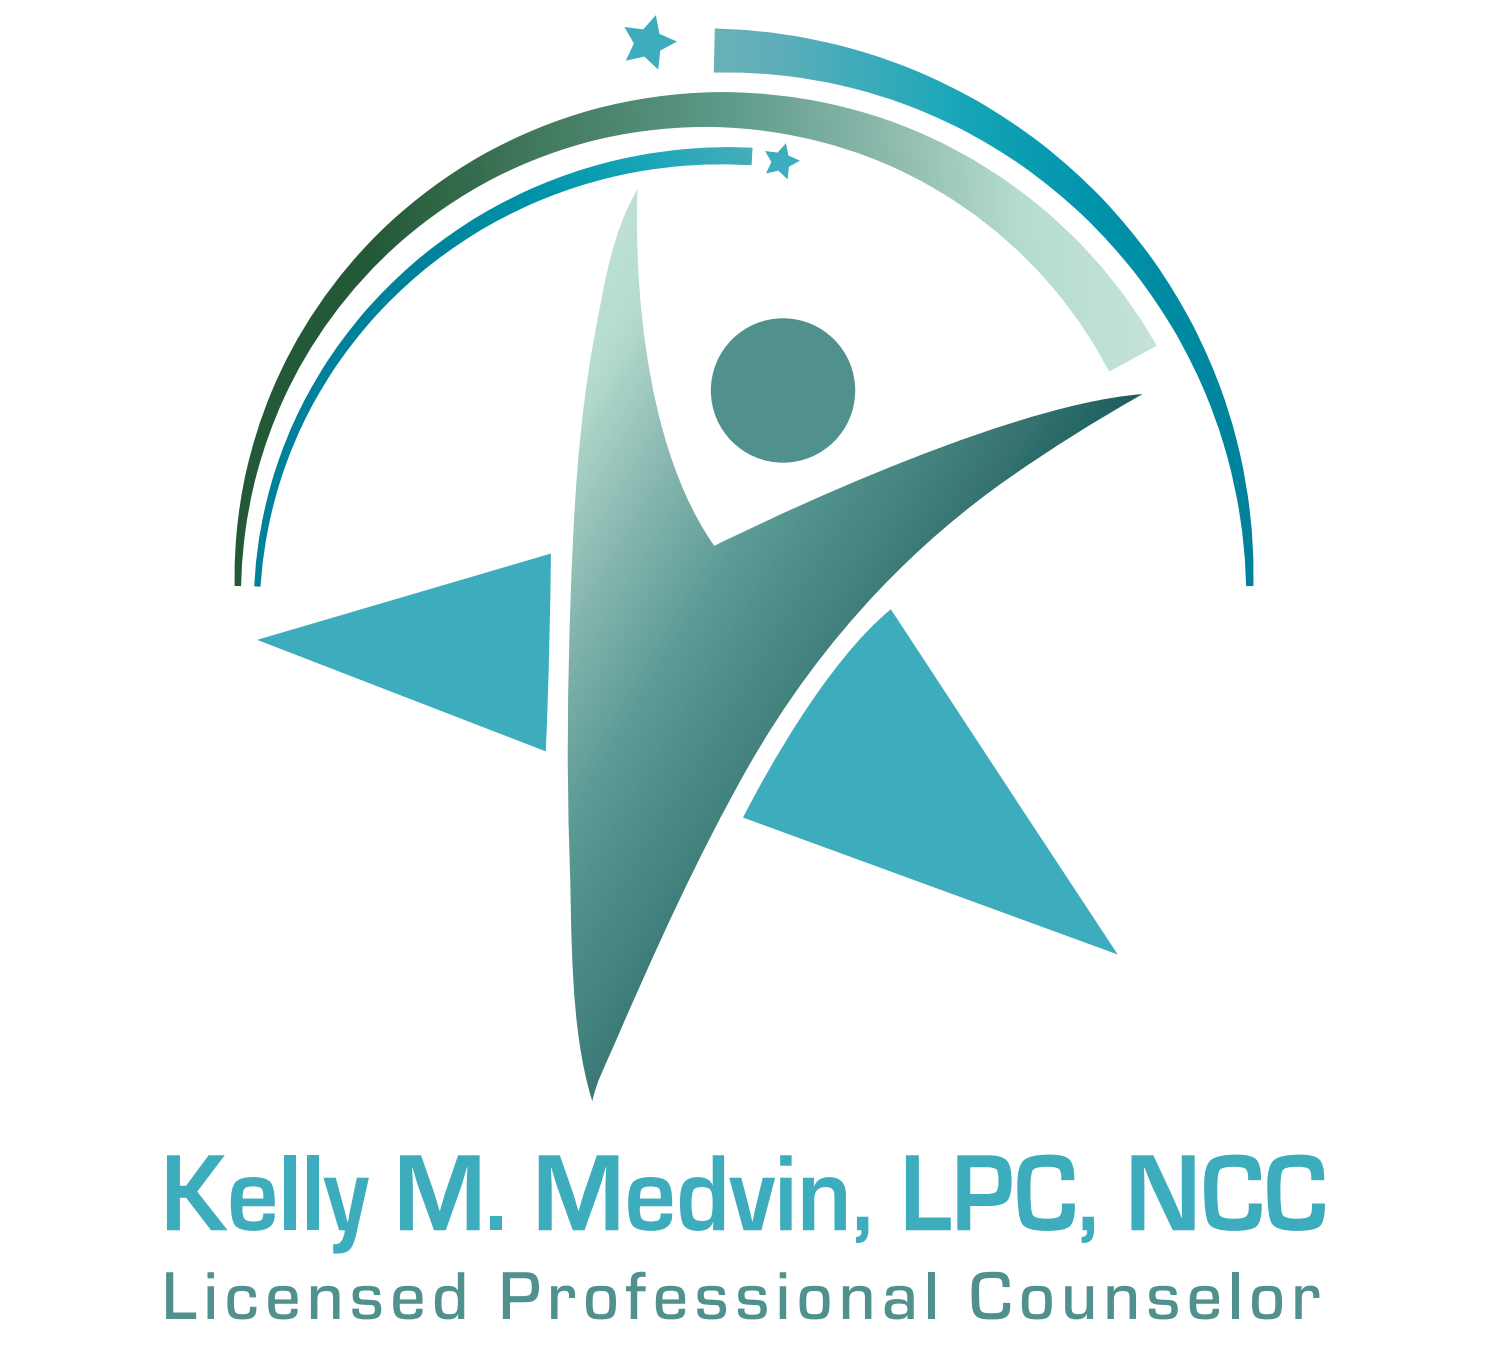 Kelly M. Medvin, LPC, NCC, Licensed Professional Counselor